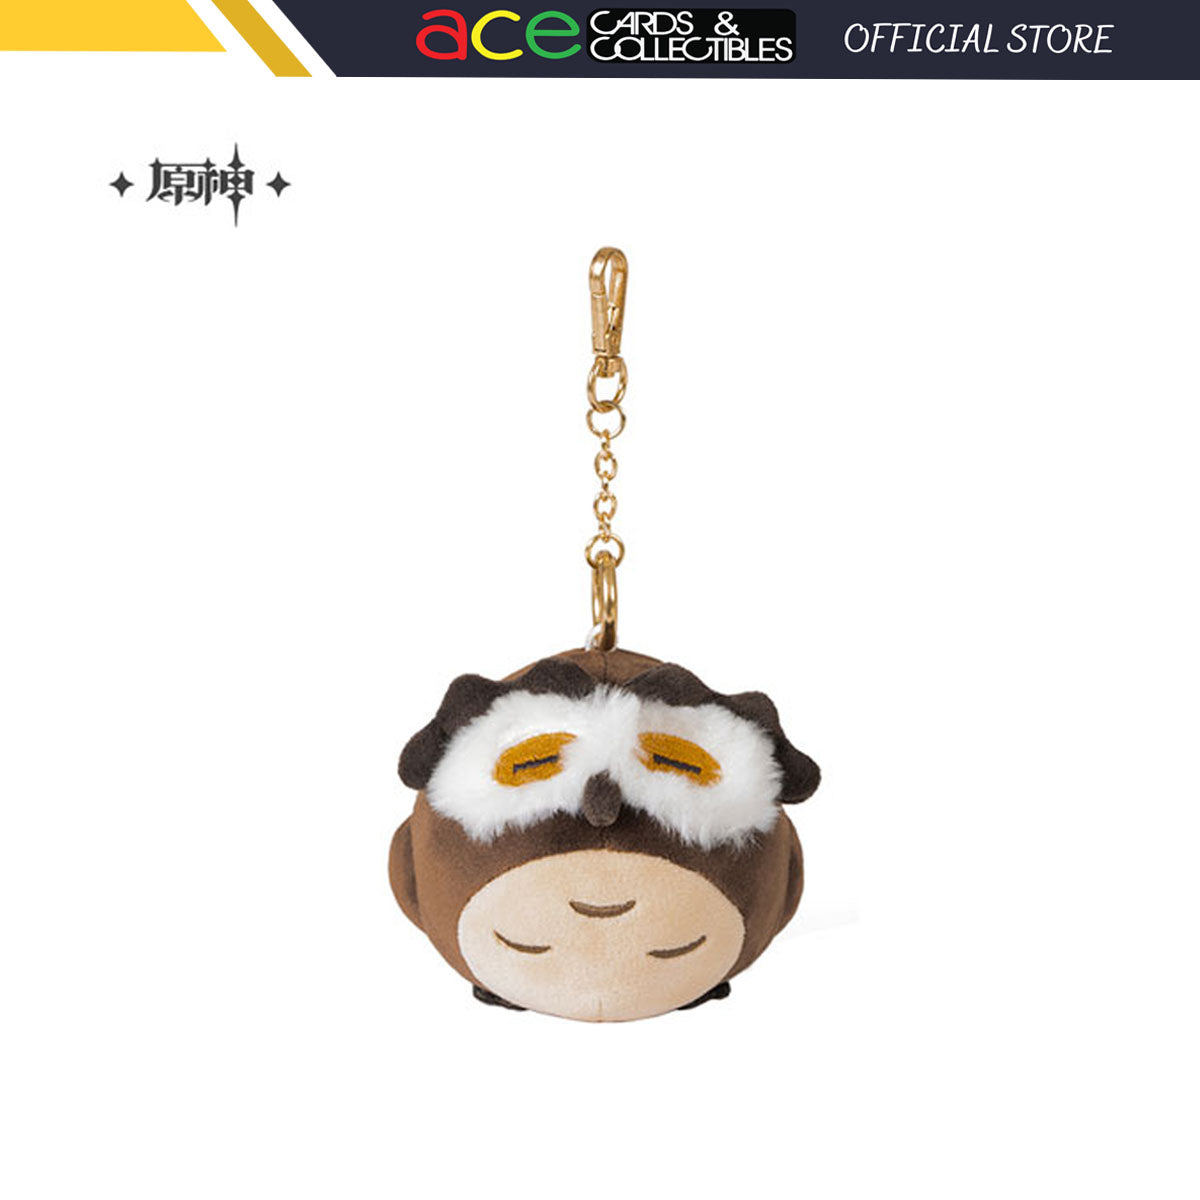 miHoYo -Genshin Impact- Small Plushie Keychain Tevyat Zoo Diluc "Noctua Owl" (10cm ver.)-miHoYo-Ace Cards & Collectibles